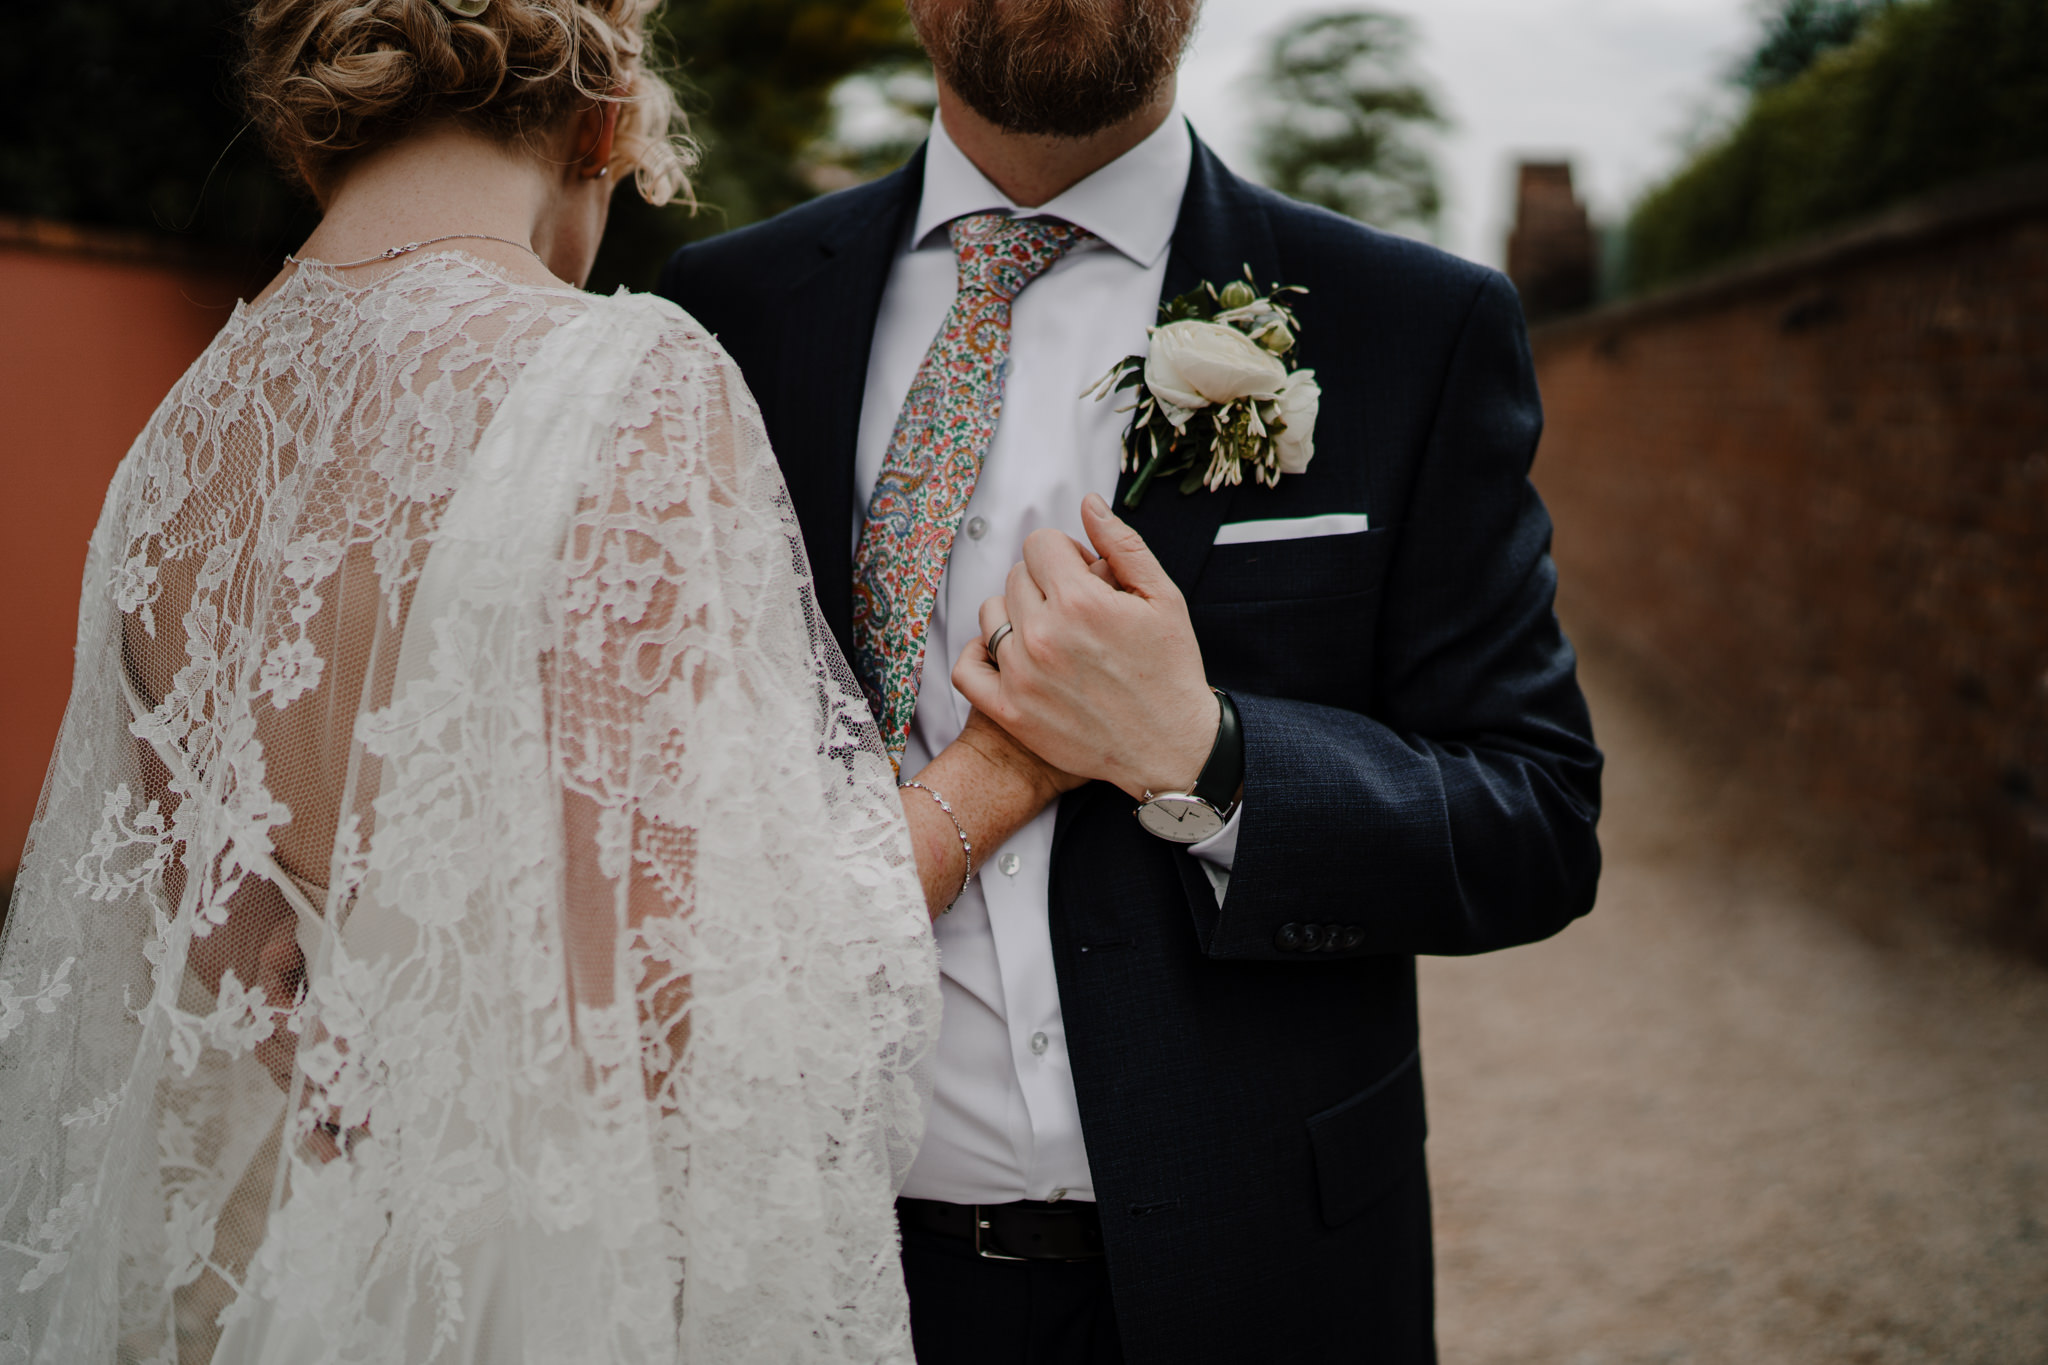 Tullyveery house wedding close up bride custome lace cape holding hands groom